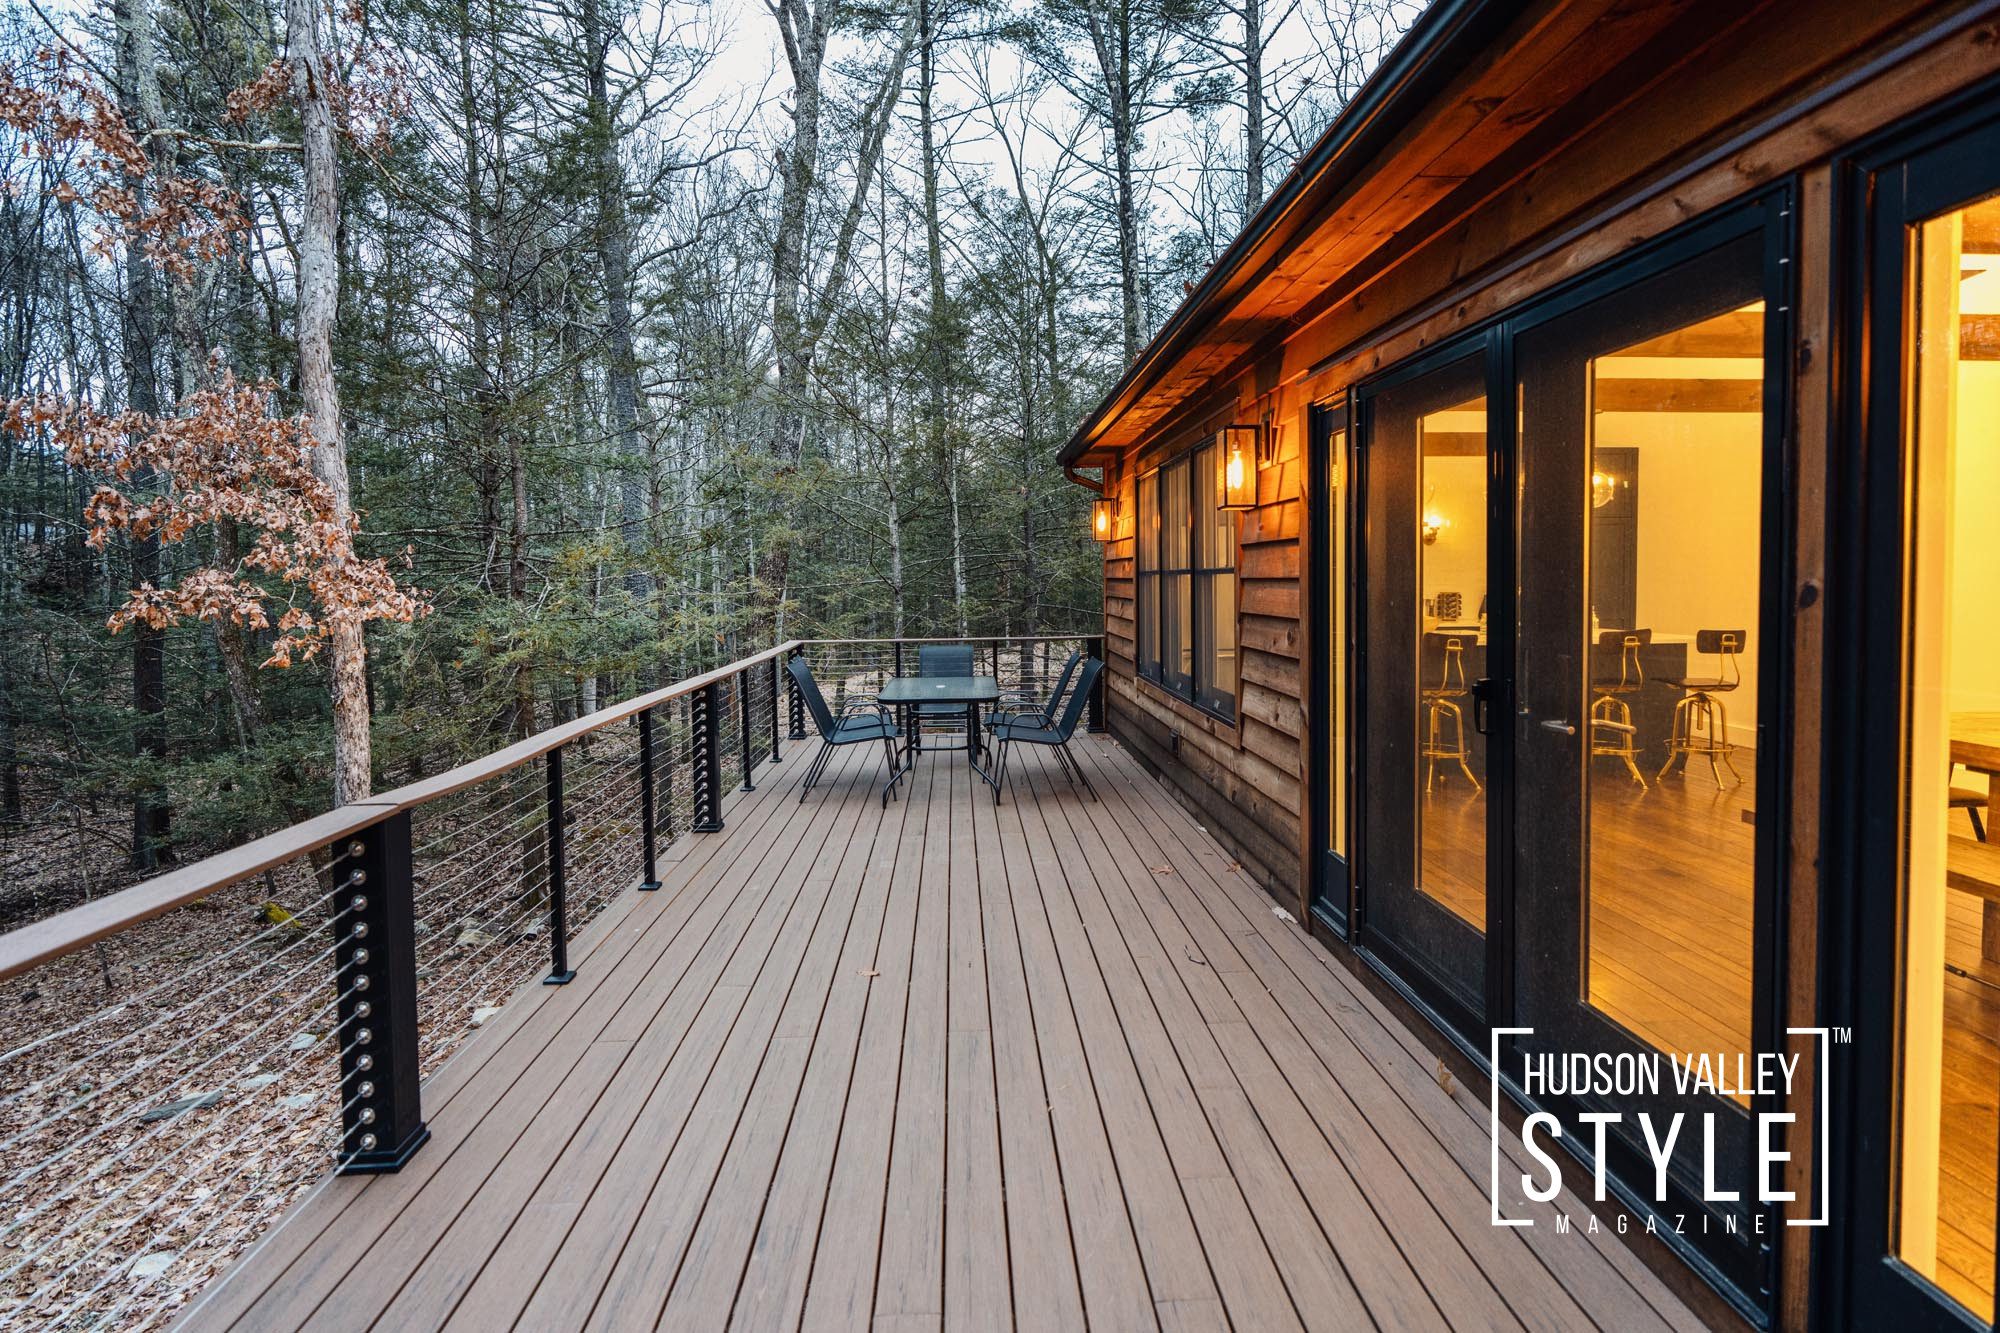 Airbnb Photographer Maxwell Alexander’s Exceptional Experience at a Modern Rustic Cabin in the Catskill Mountains